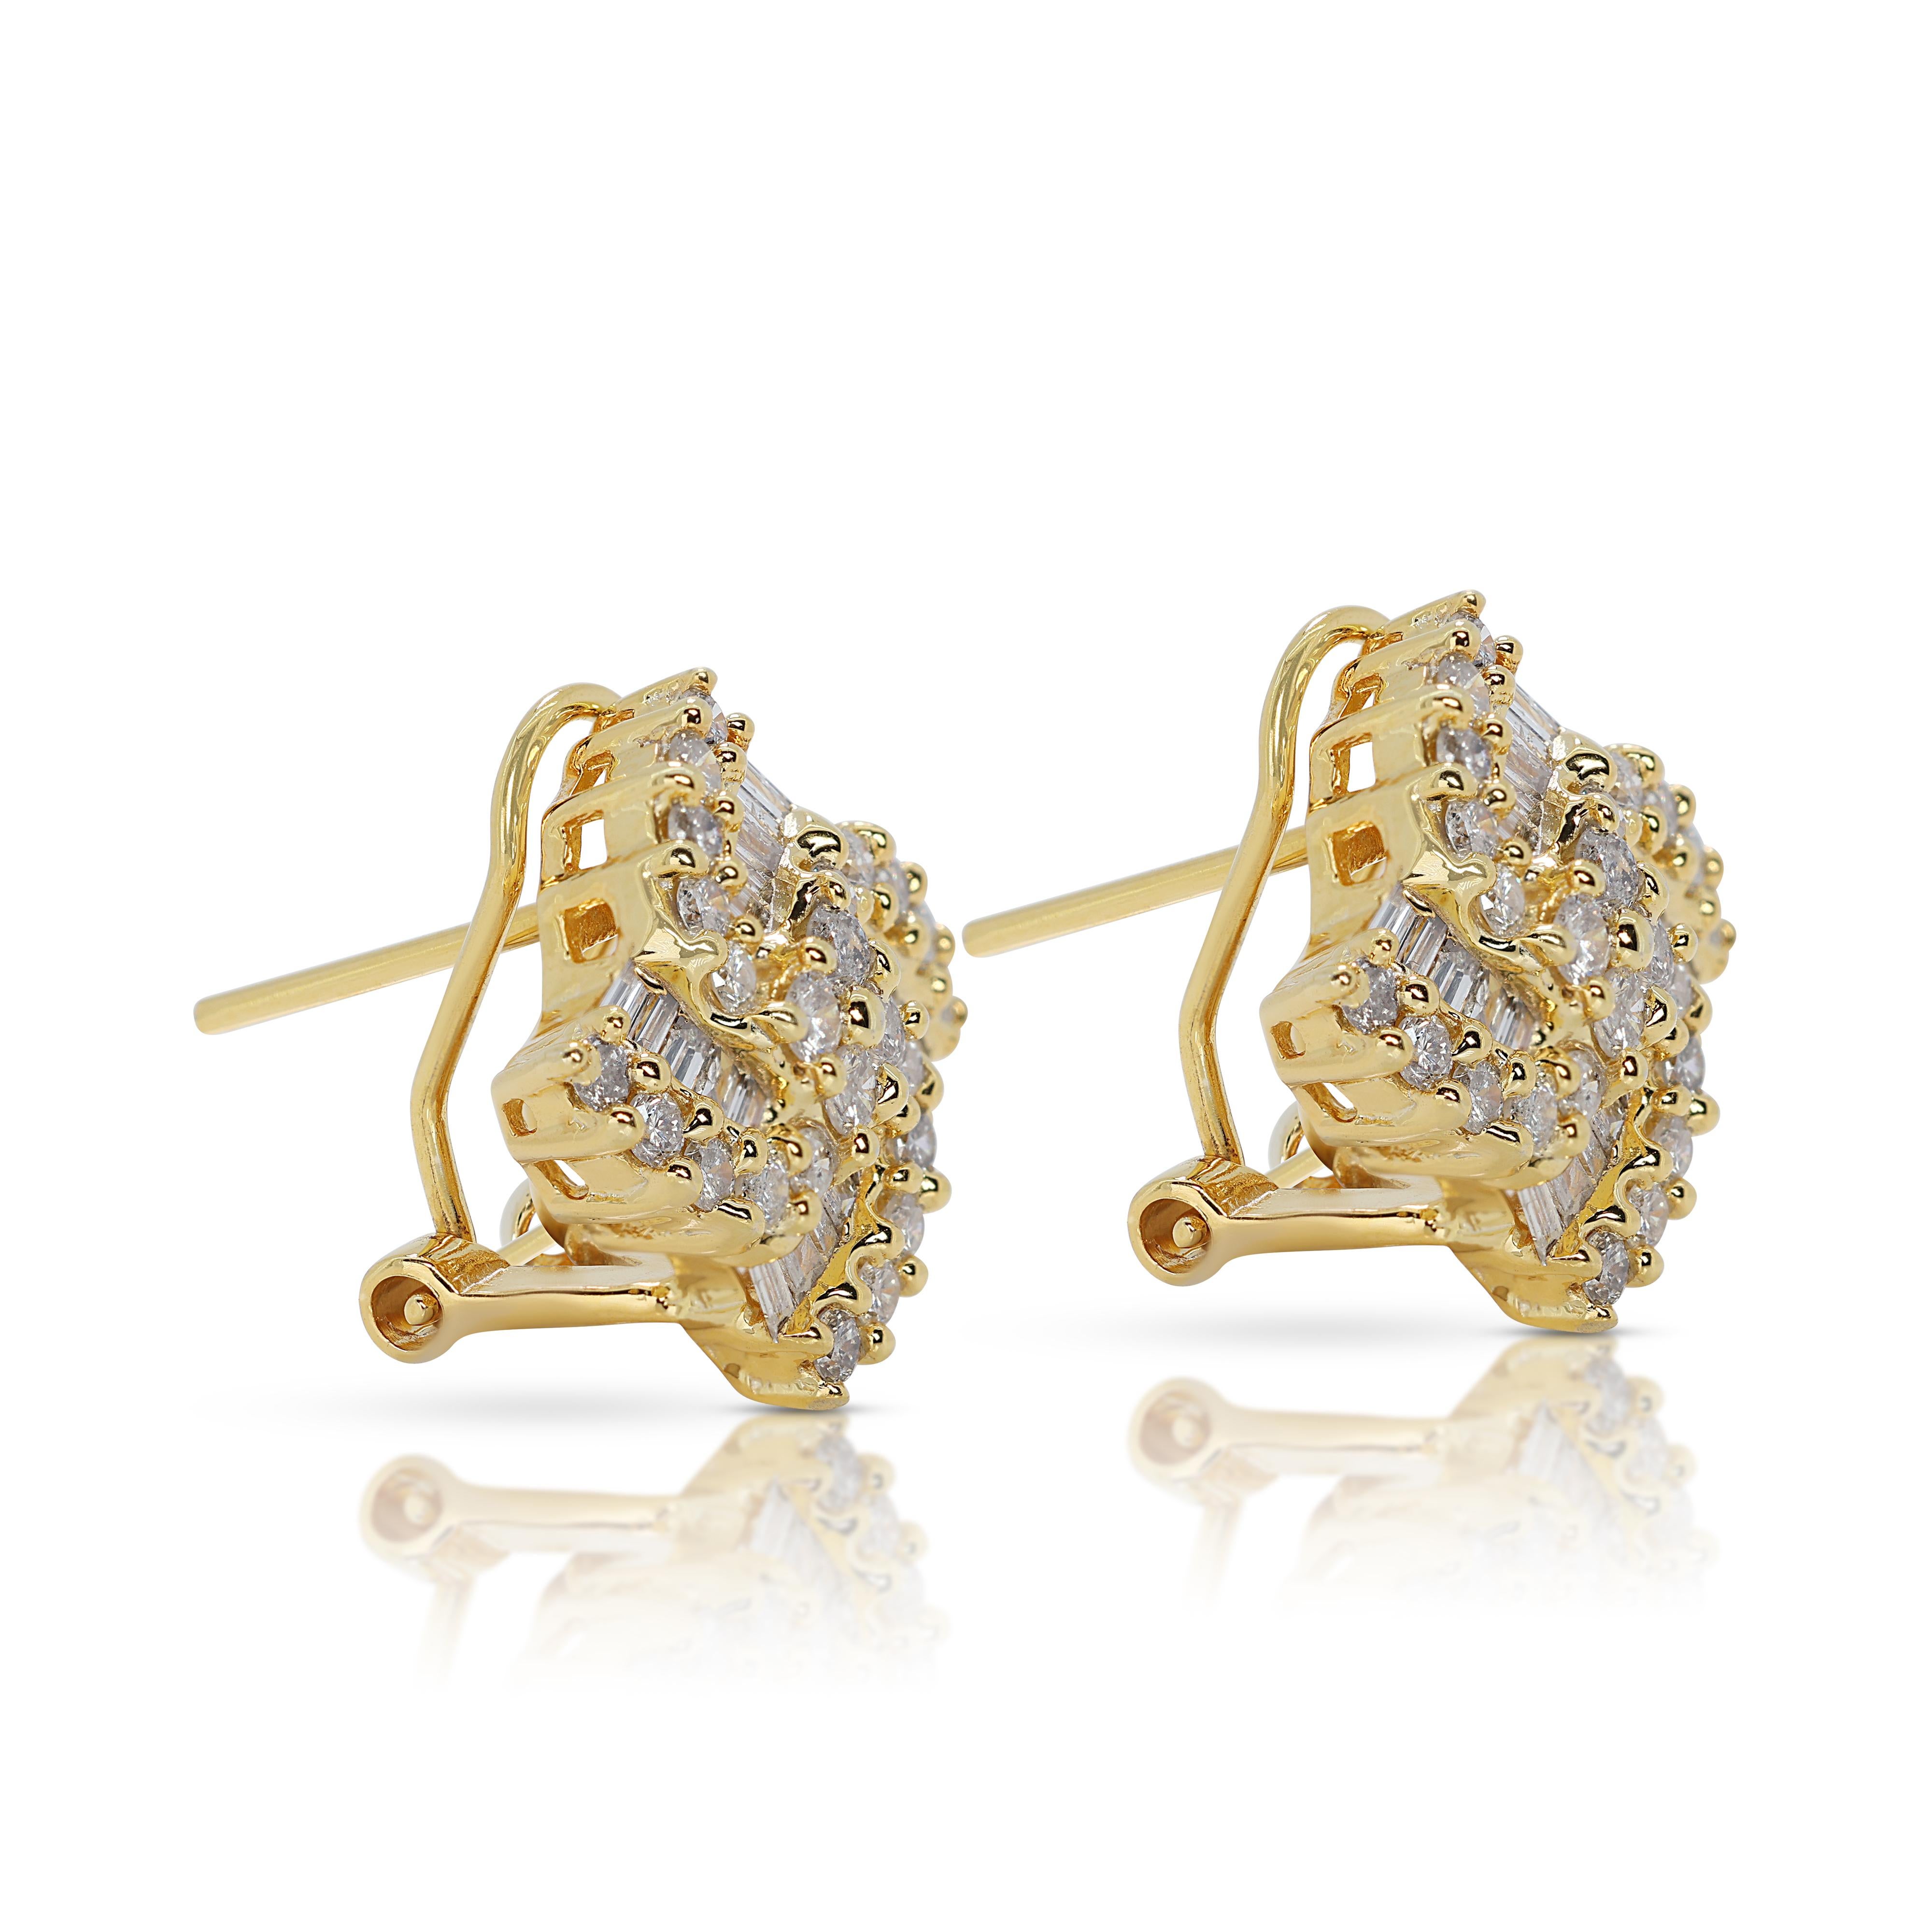 Round Cut Elegant 0.84ct Diamonds Earrings in 18K Yellow Gold For Sale